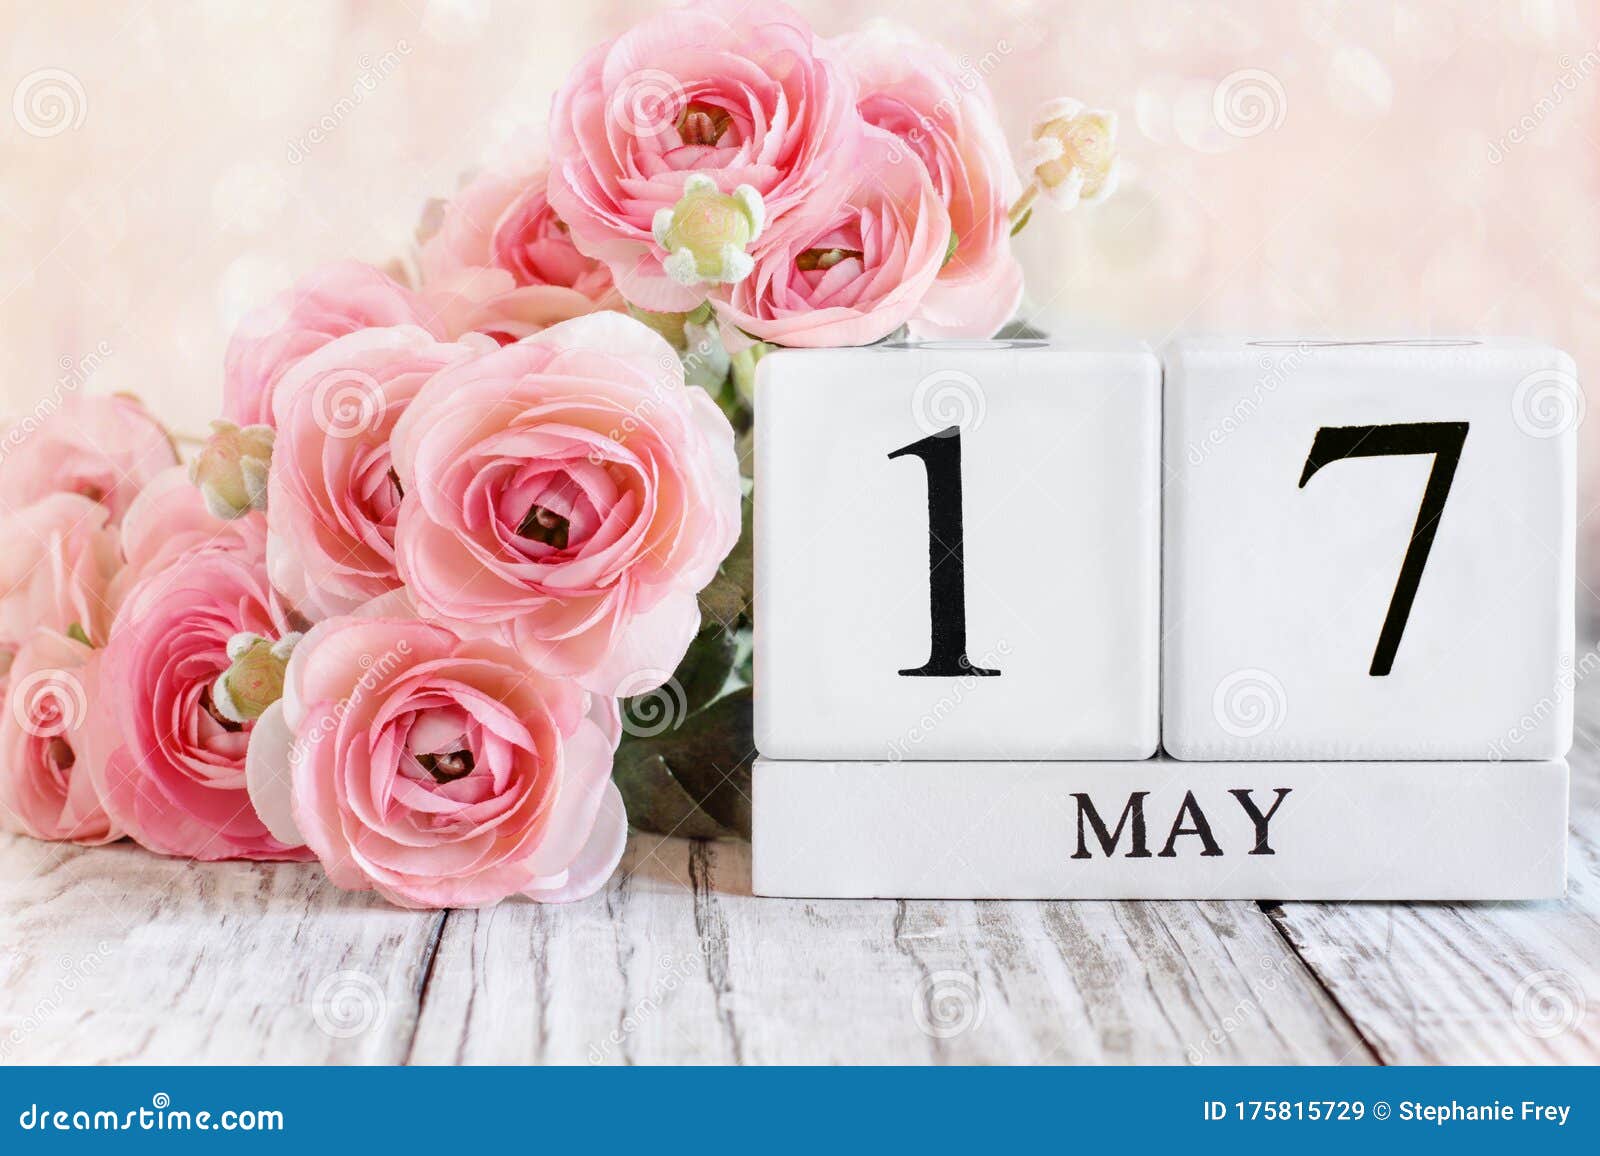 May 17th Calendar With Pink Ranunculus Stock Image Image of bunch